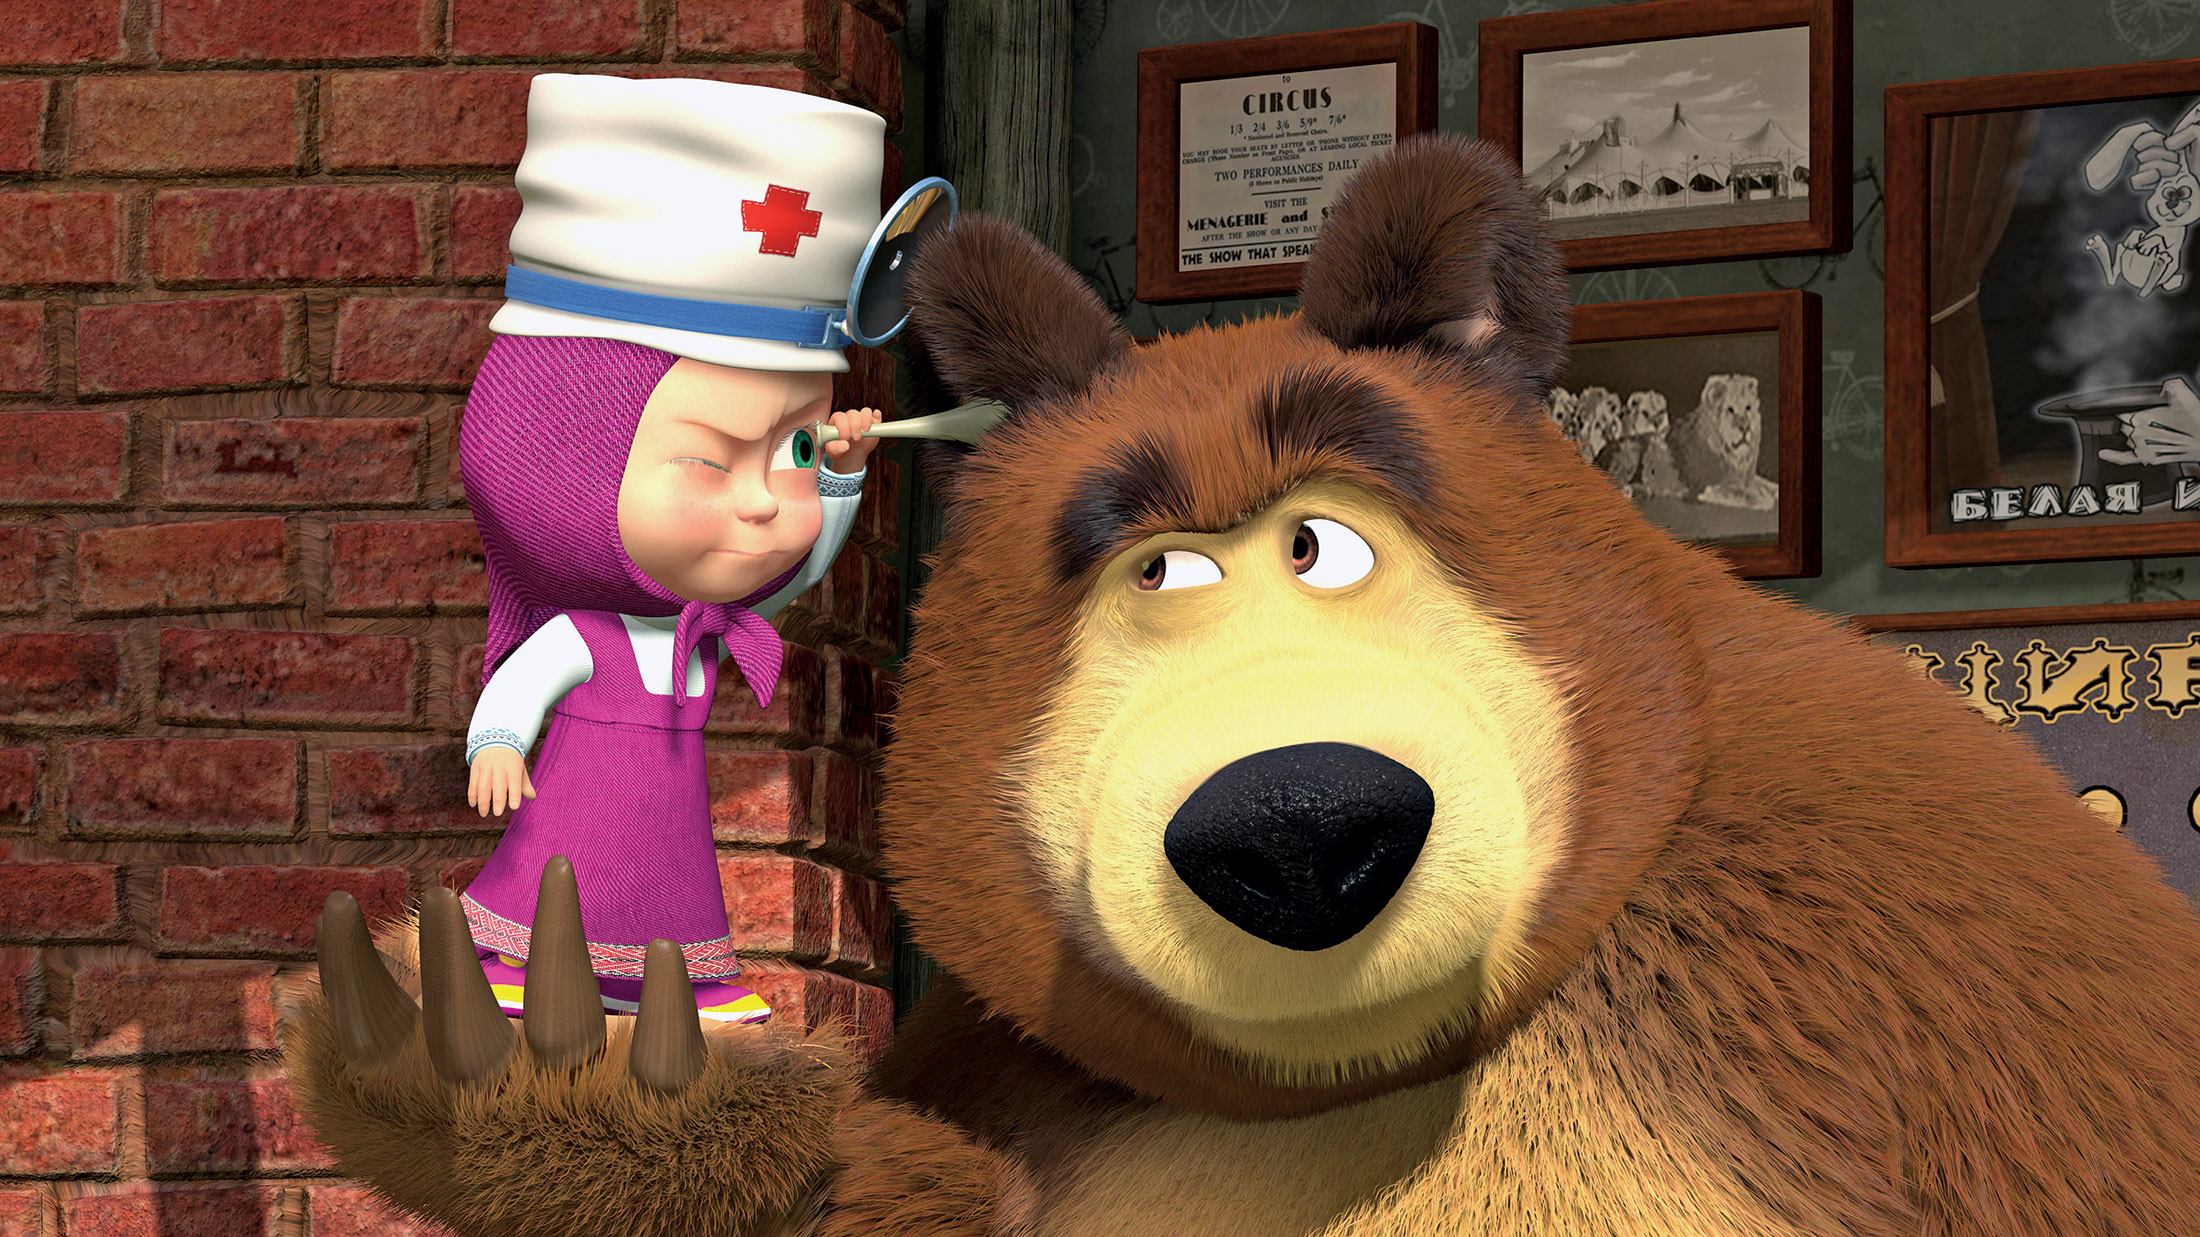 Russian Cartoon Masha and the Bear Pulls in Billions of Rubles - Bloomberg